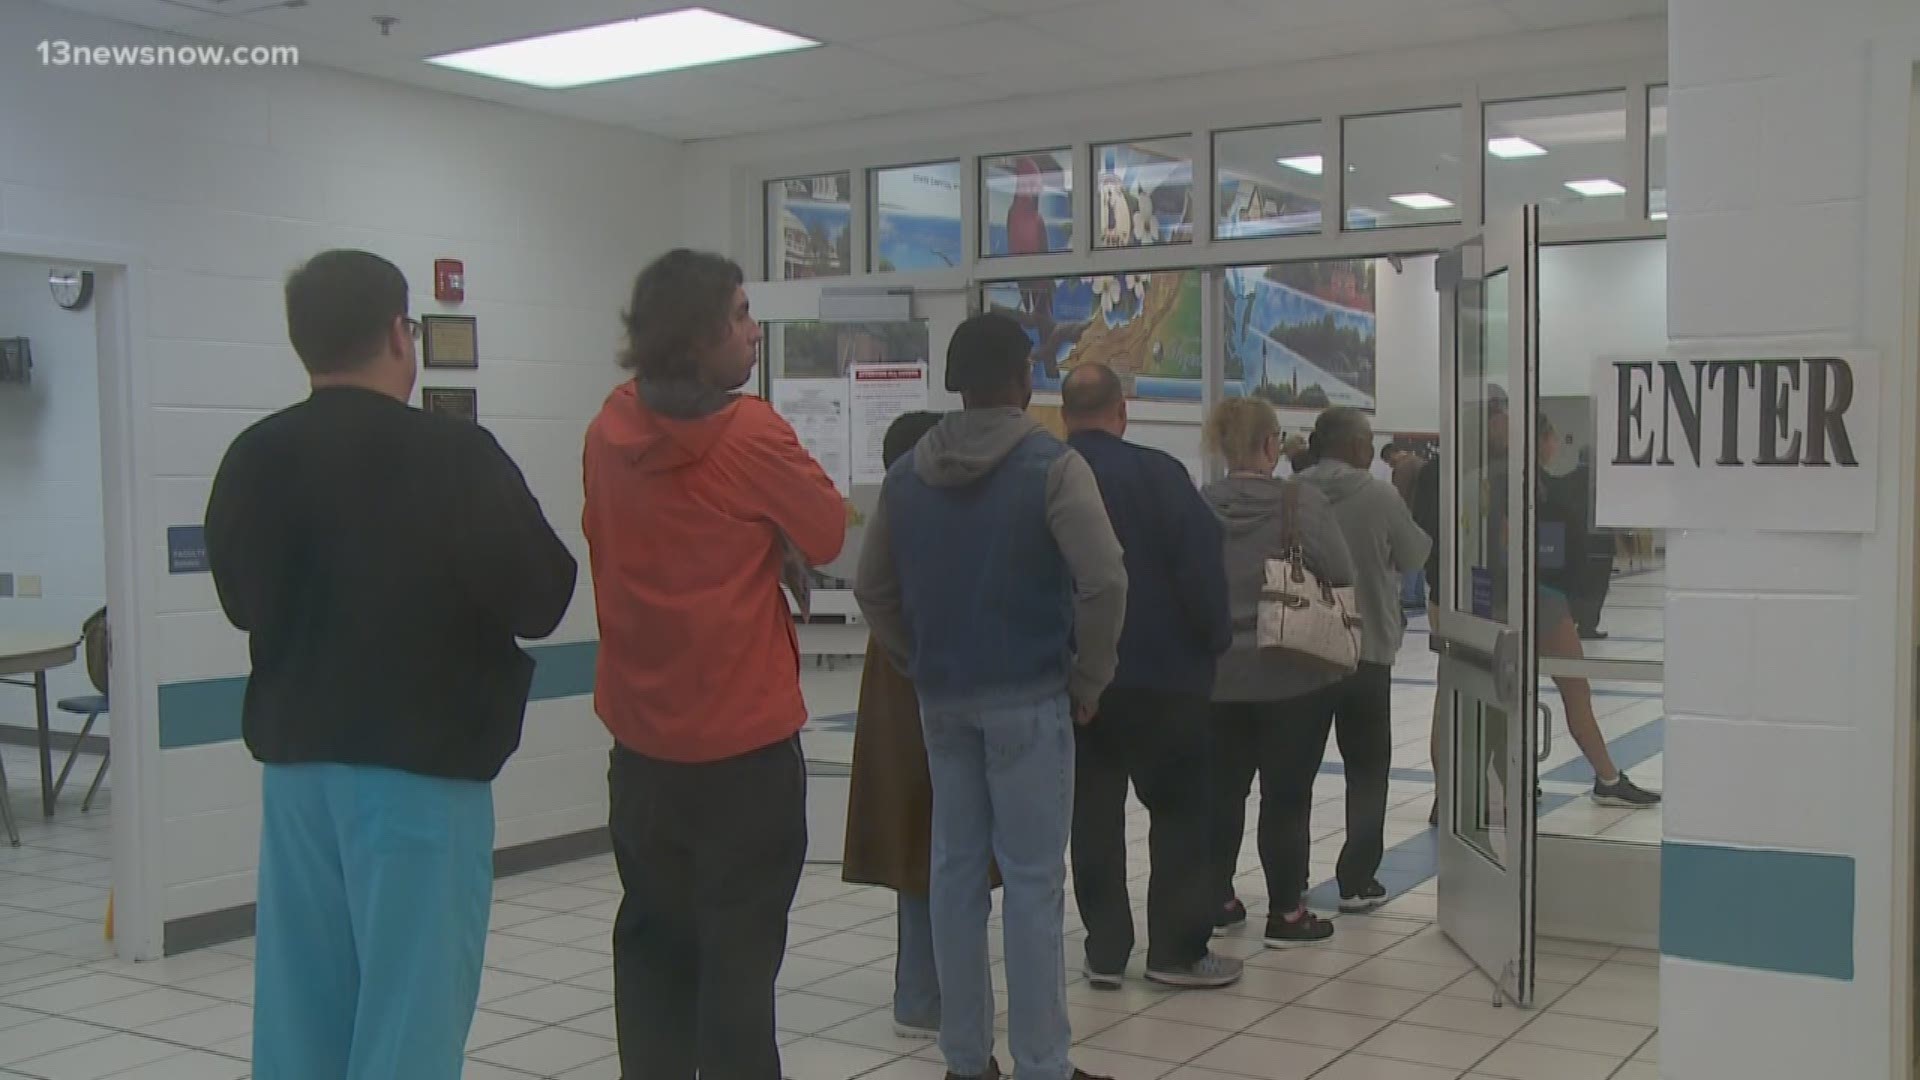 Turnout for off-year elections aren't usually high, but one area in Virginia Beach is seeing voters come out in droves. 13News Now Megan Shinn has more.